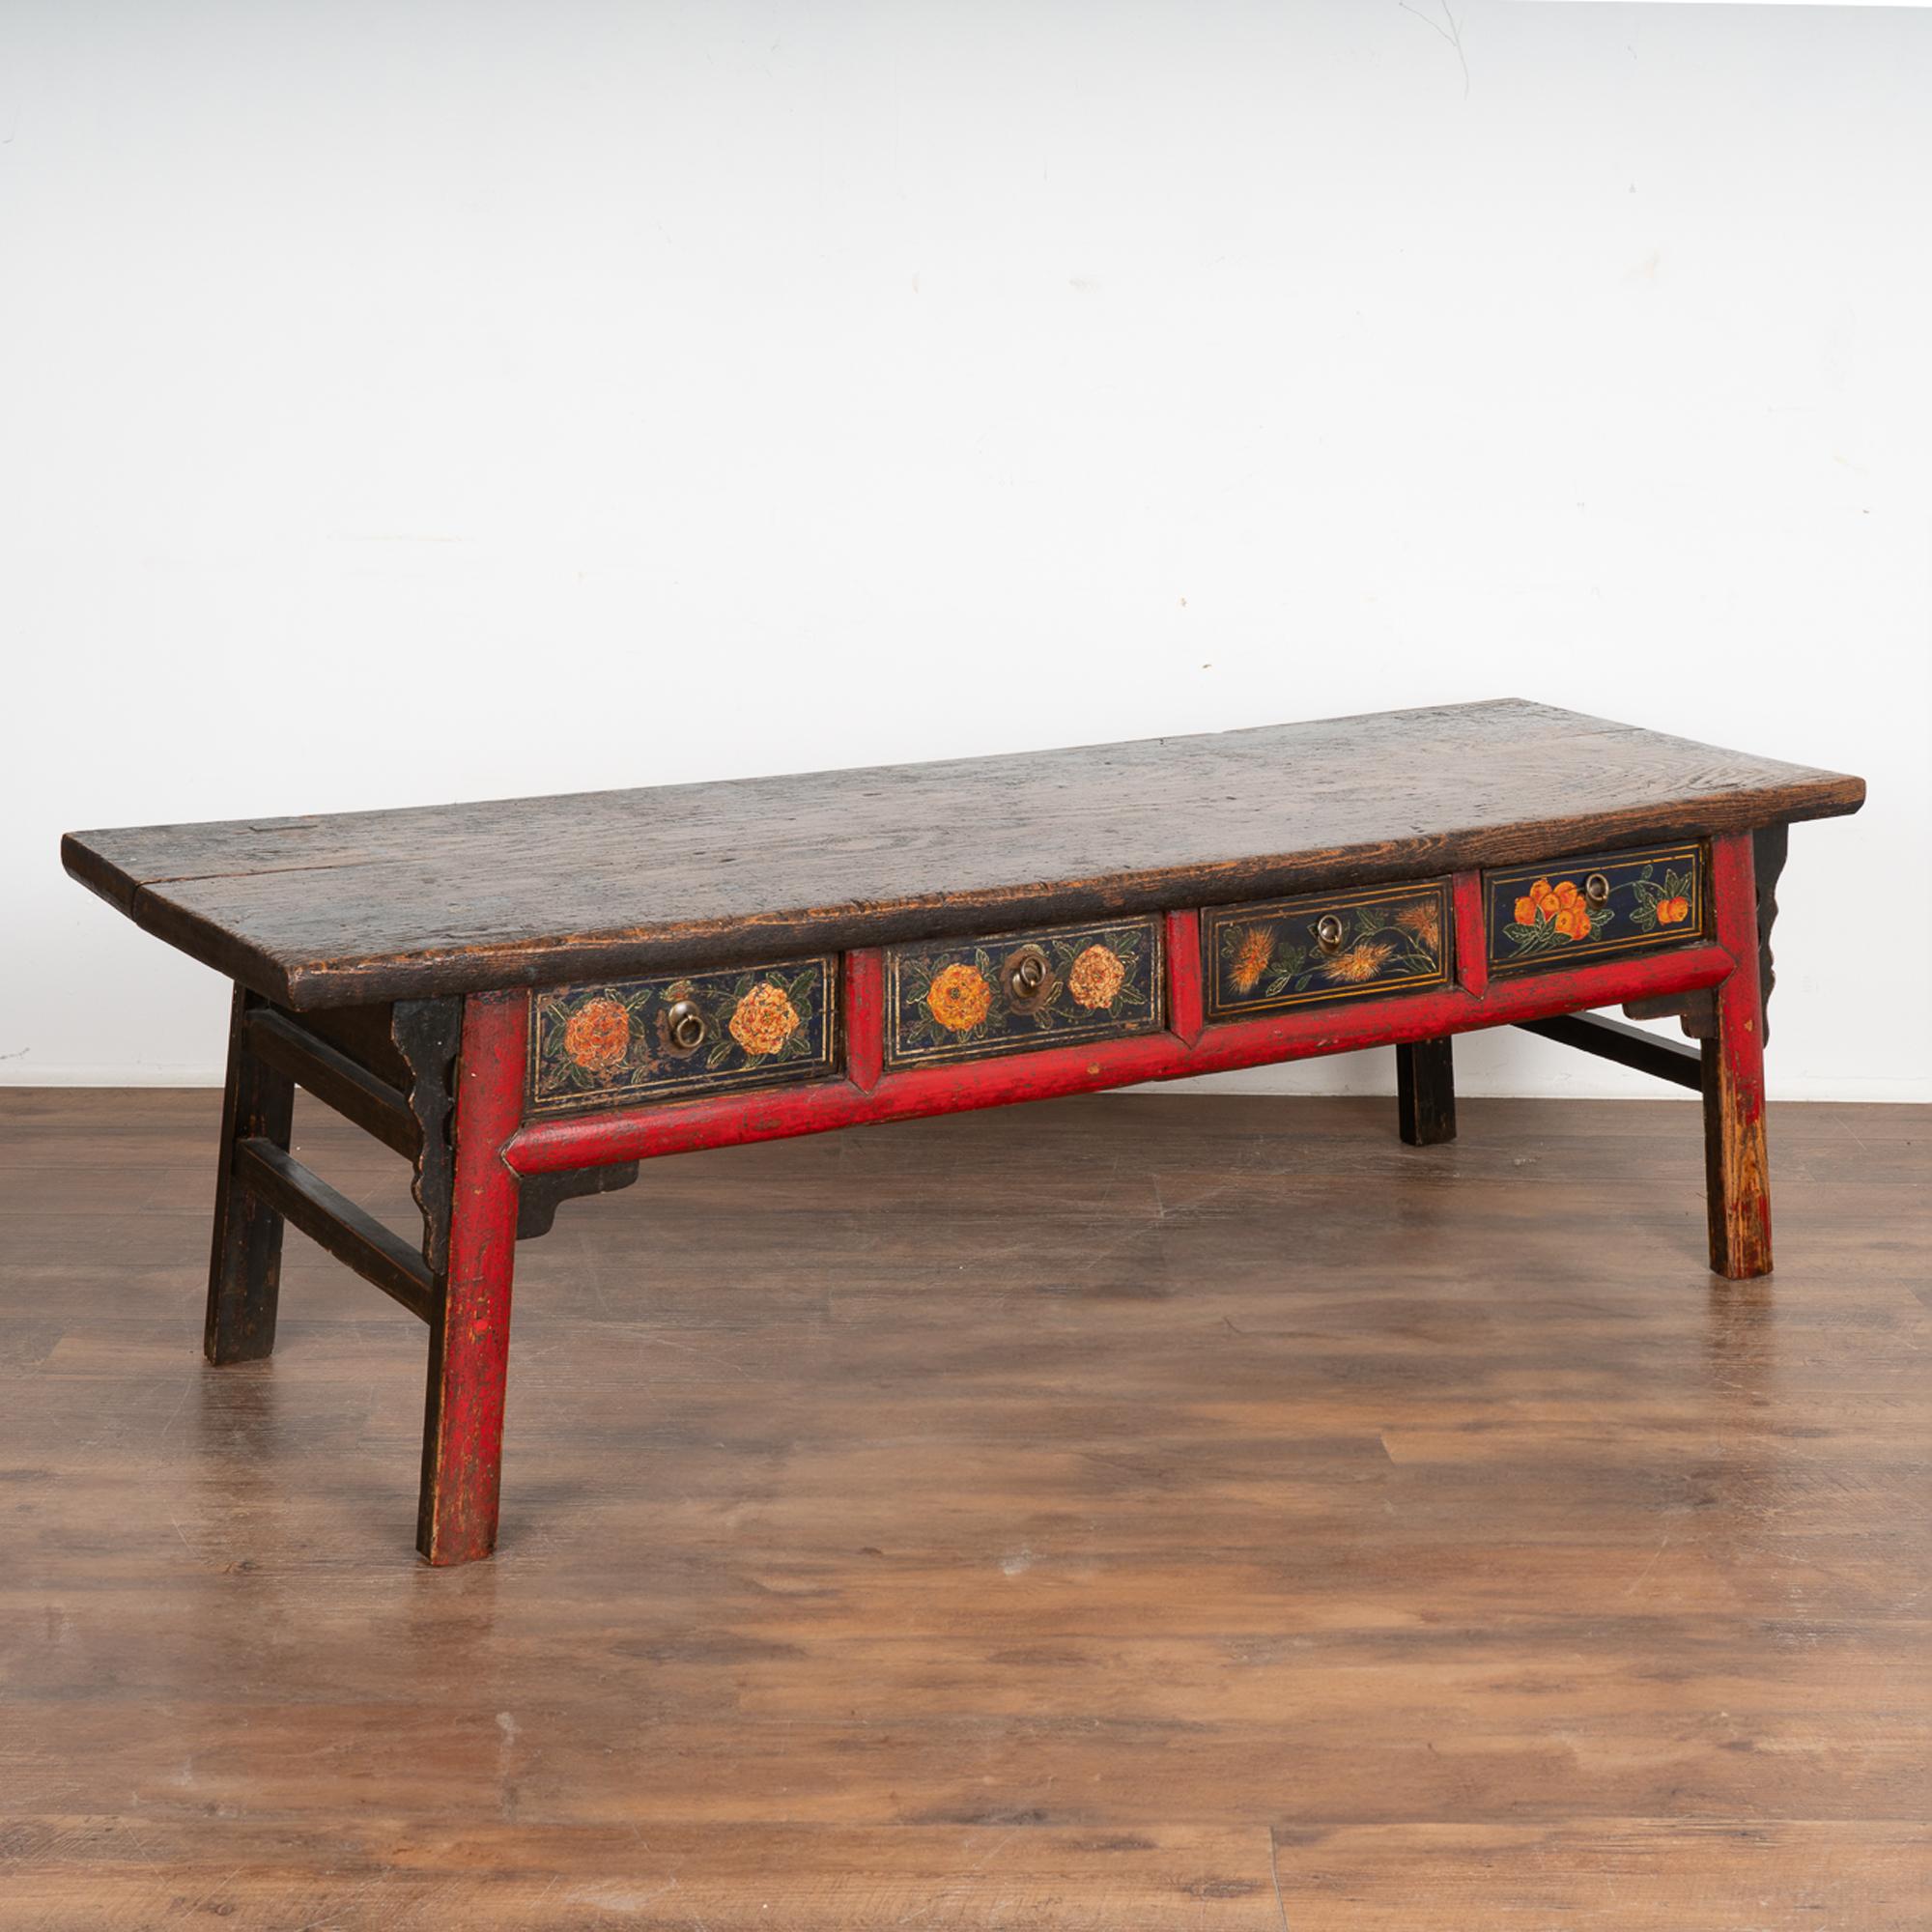 This striking coffee table is an exceptional find. Note the original hand painted flowers and red trim highlighting the legs and back.
Enlarge photos of the top to appreciate the thick wood, which was once painted black but is now worn and